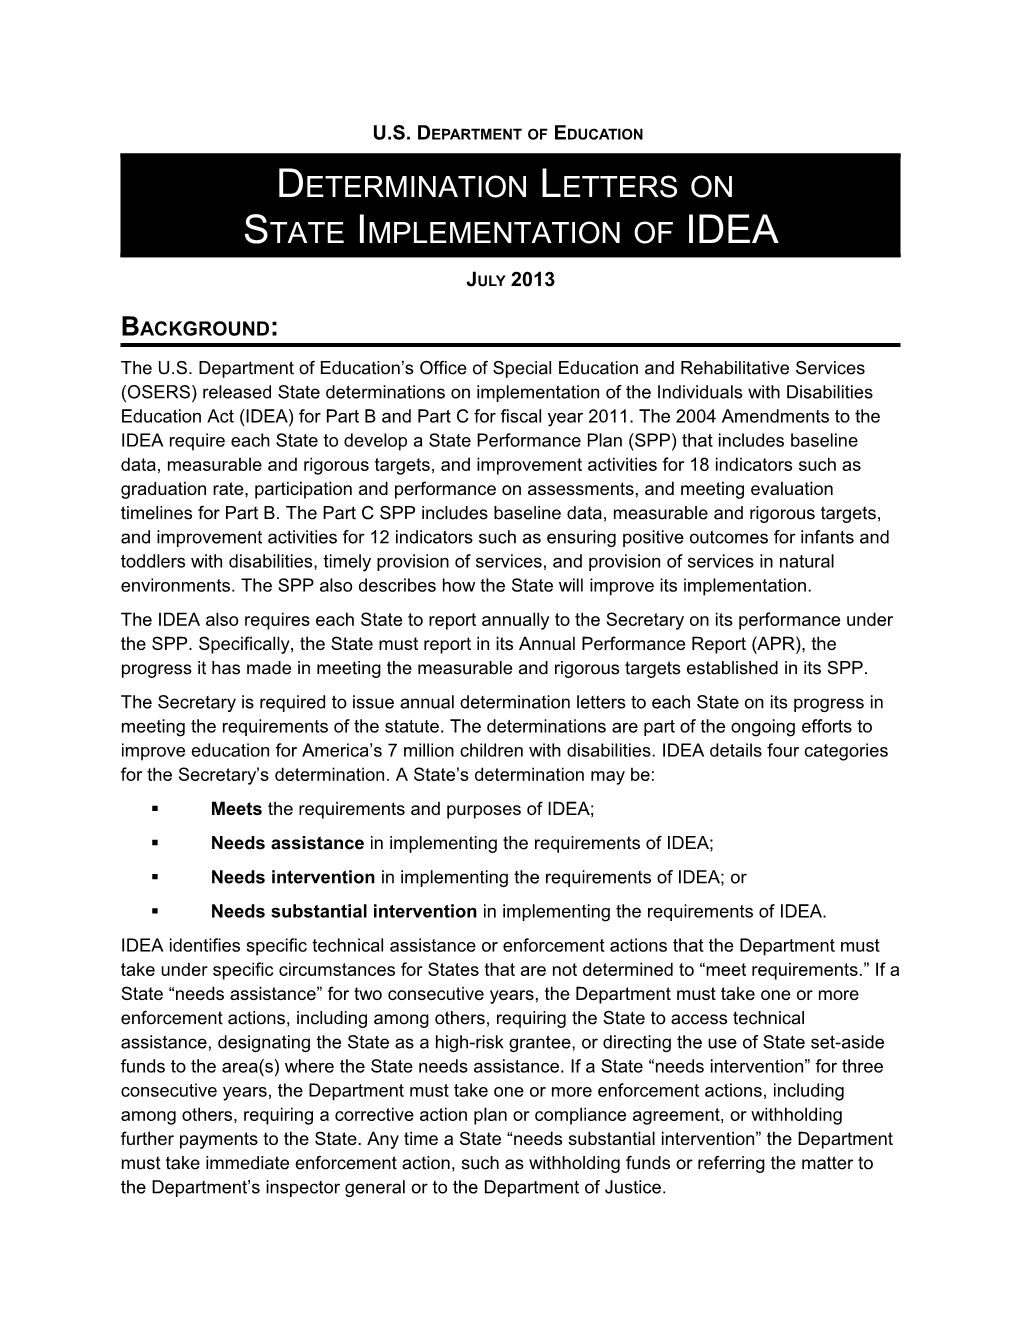 Determination Letters on State Implementation of IDEA. 2013. (MS Word)